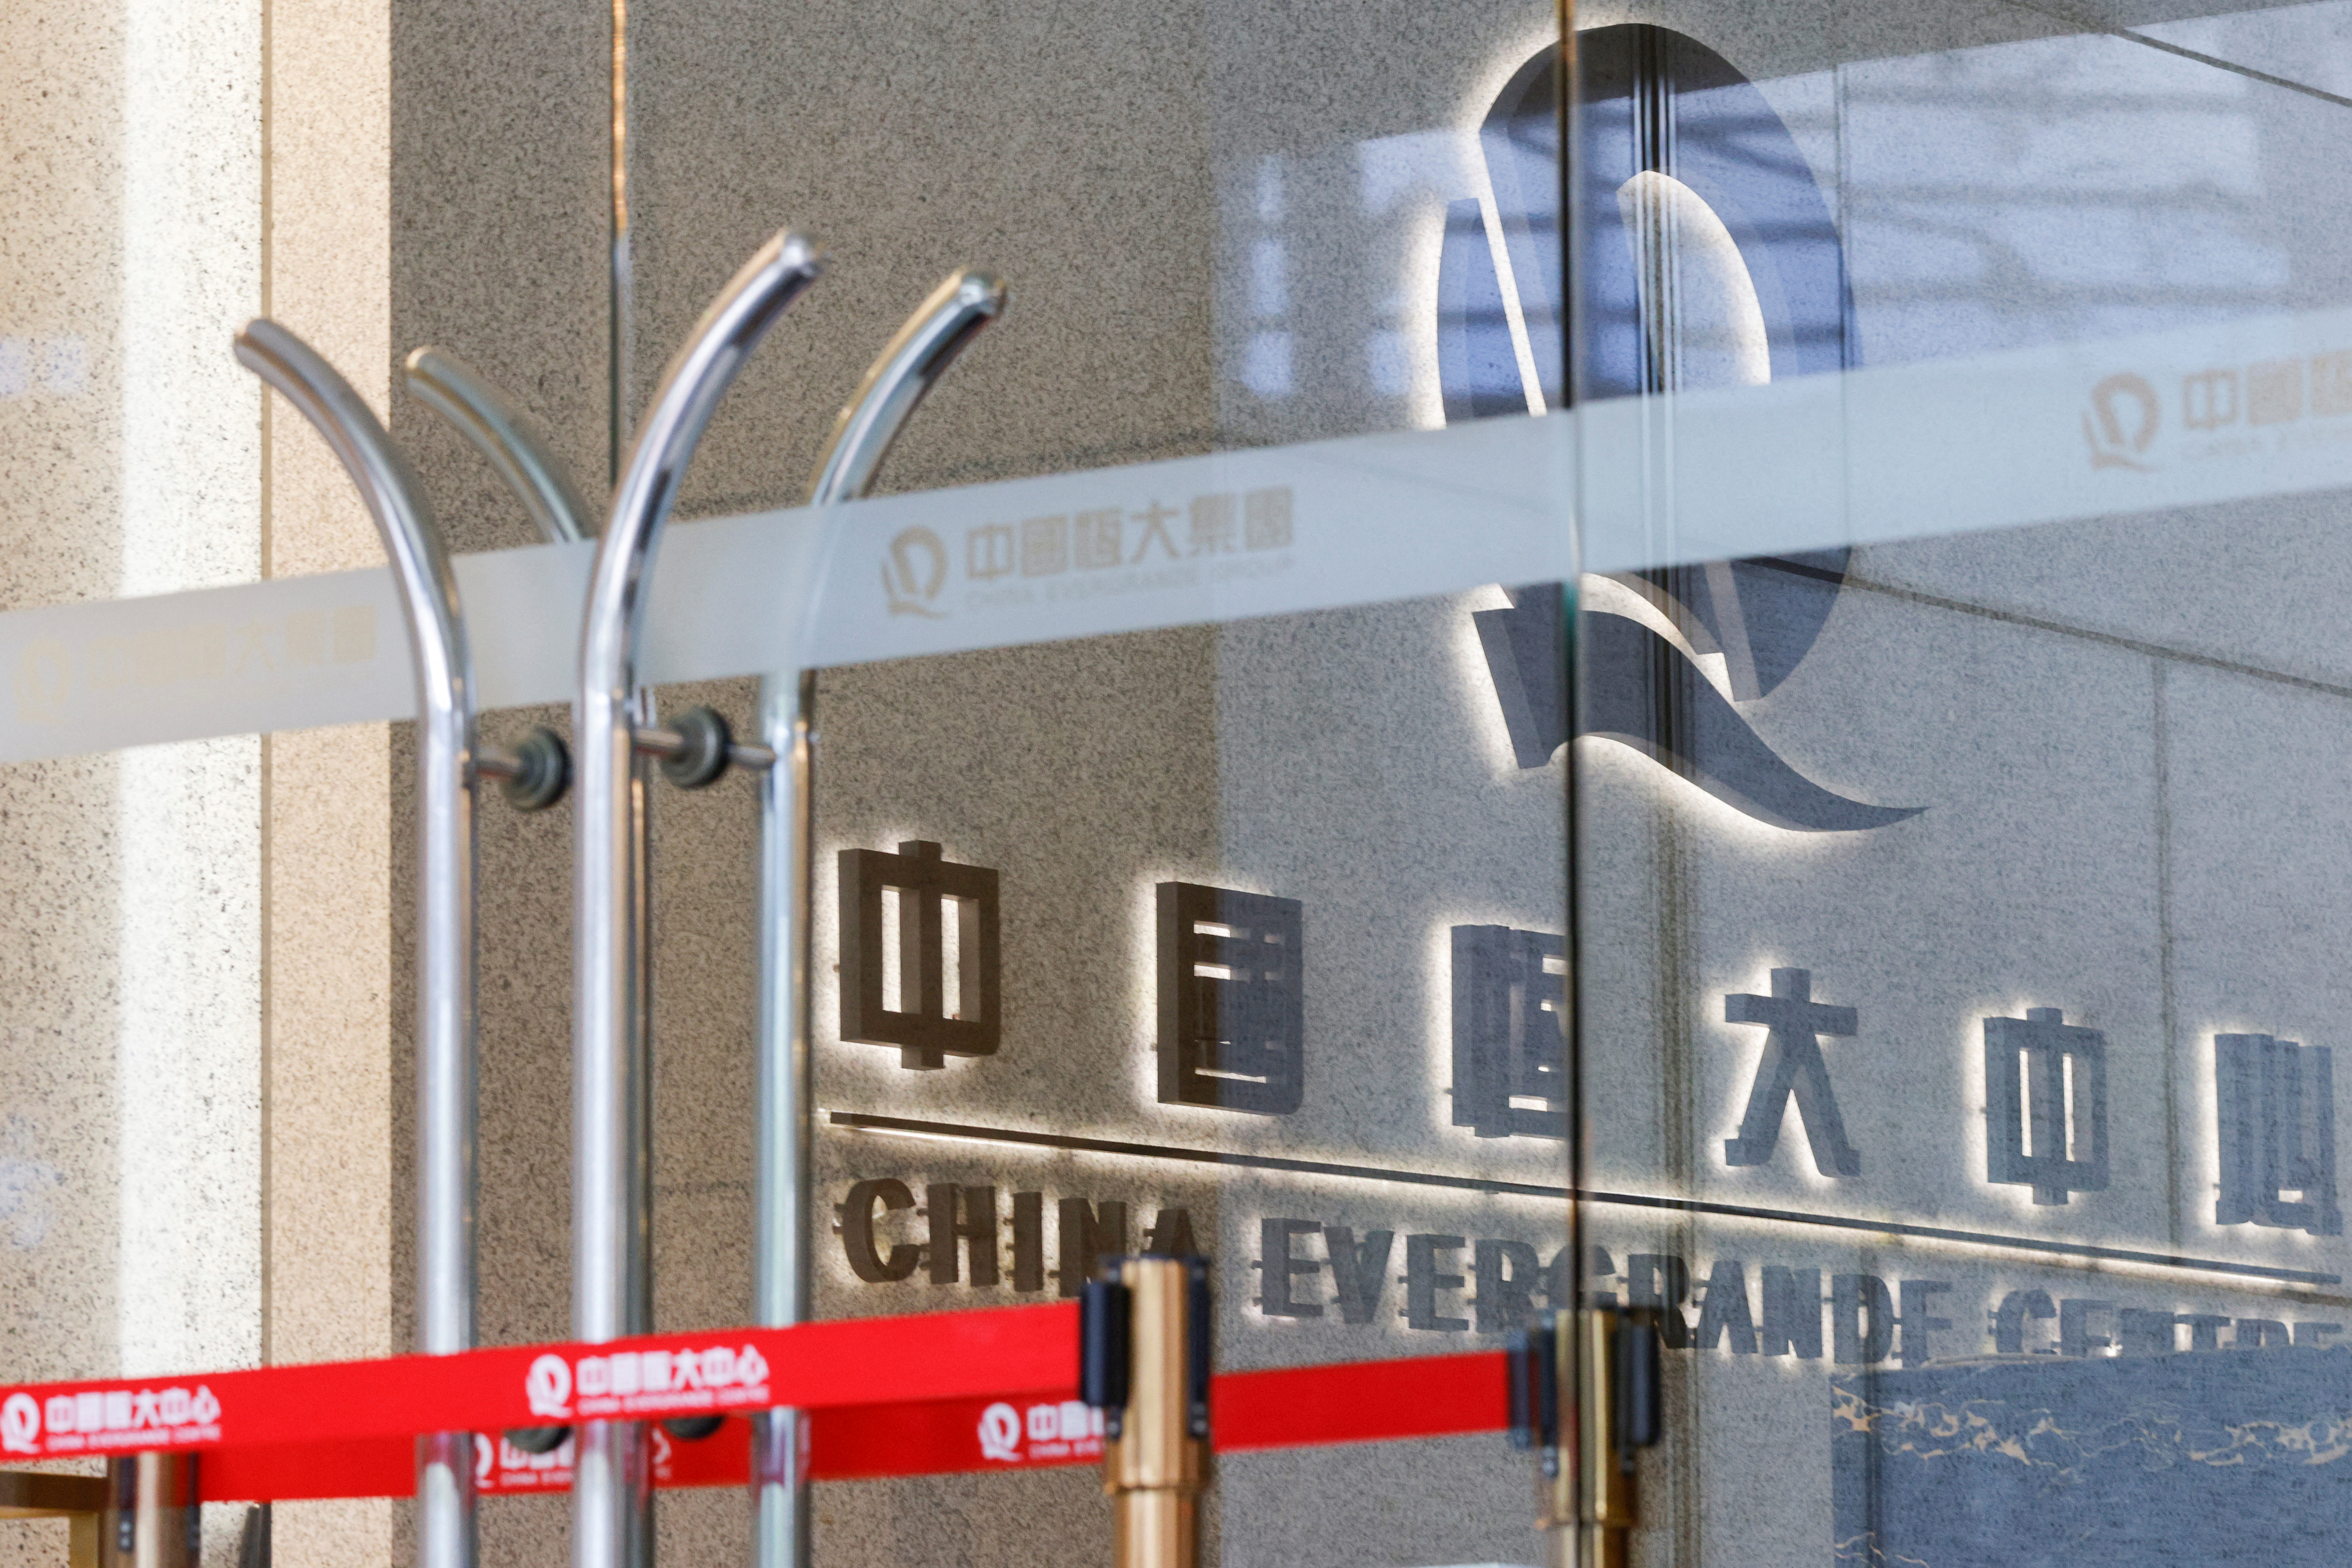 The logo of China Evergrande is seen at China Evergrande Centre in Hong Kong, China December 7, 2021. REUTERS/Tyrone Siu/File Photo